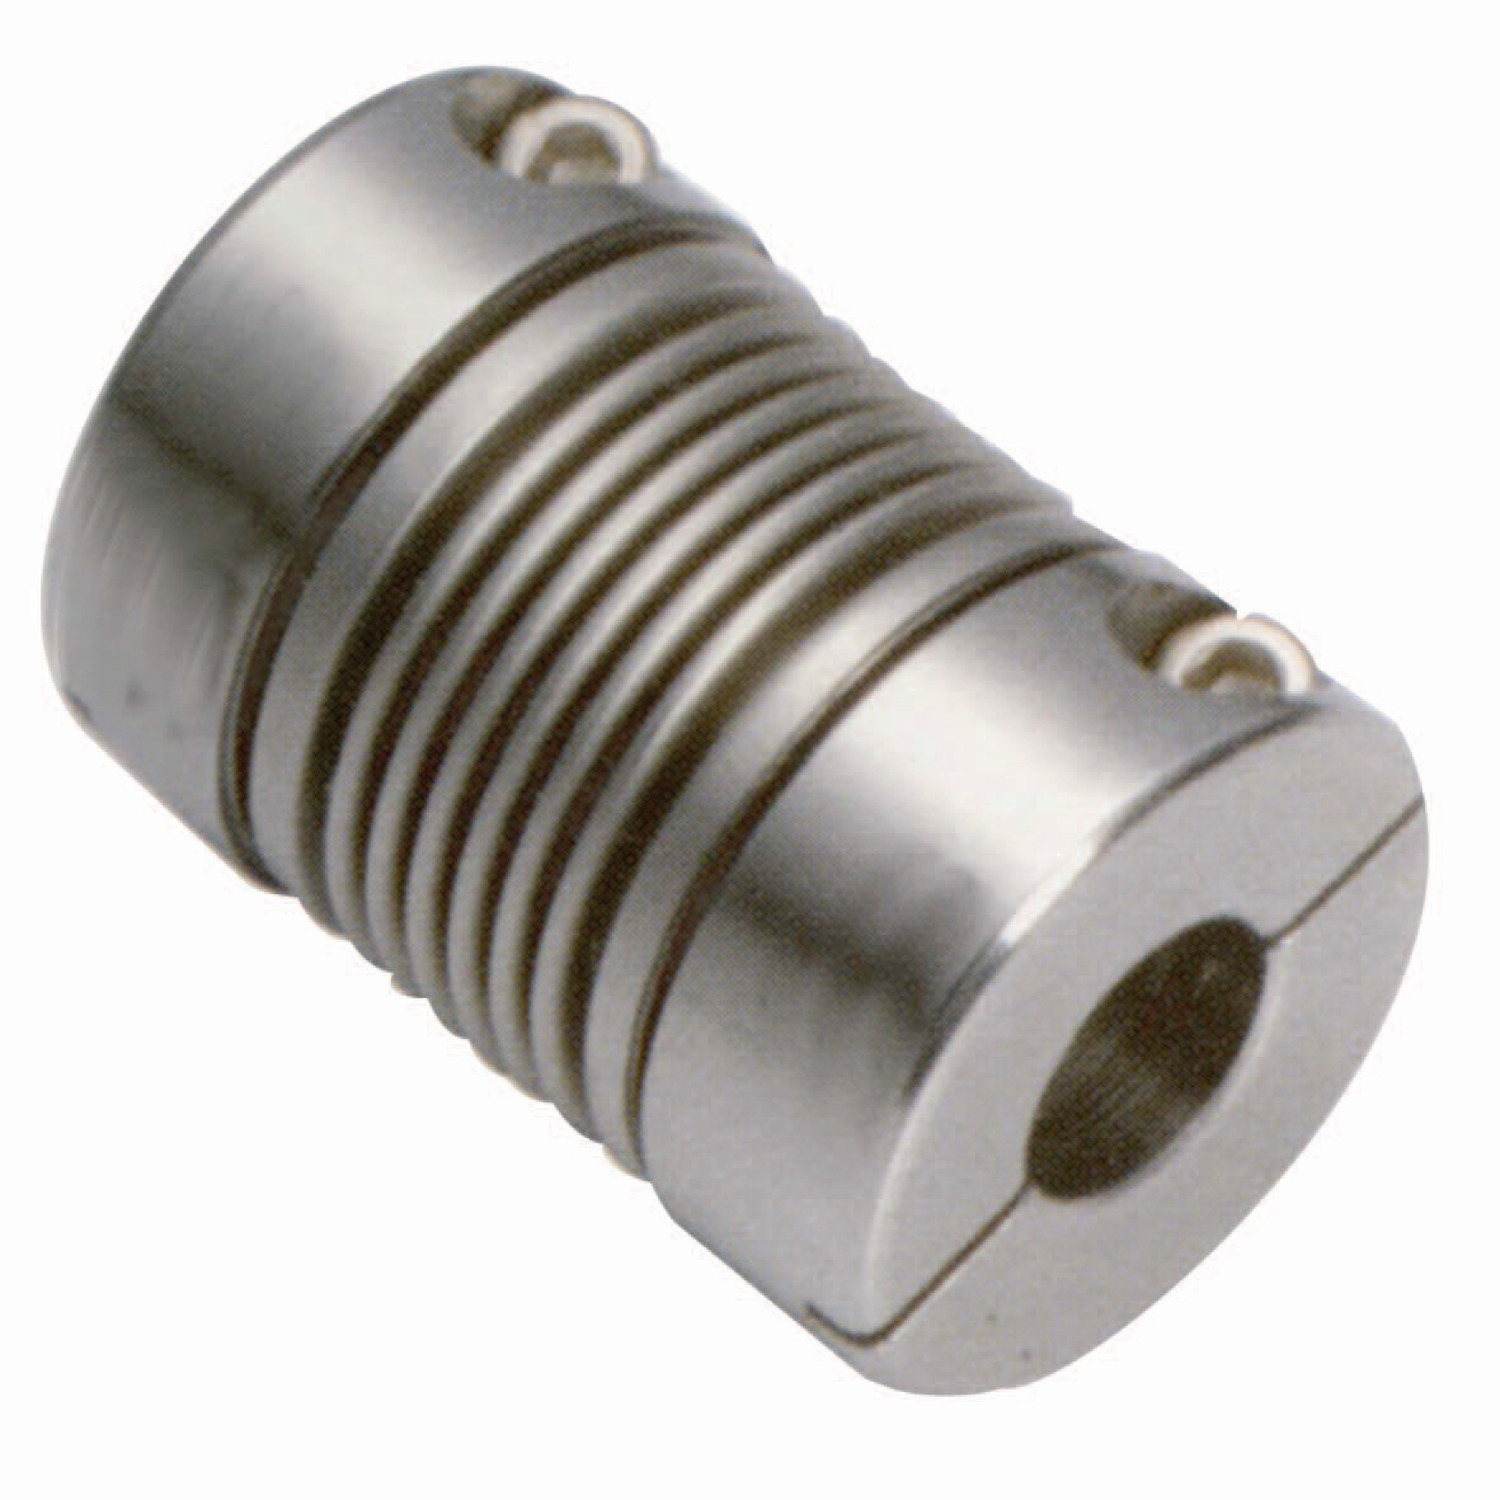 R3010.1 - Bellows Coupling - Stainless steel